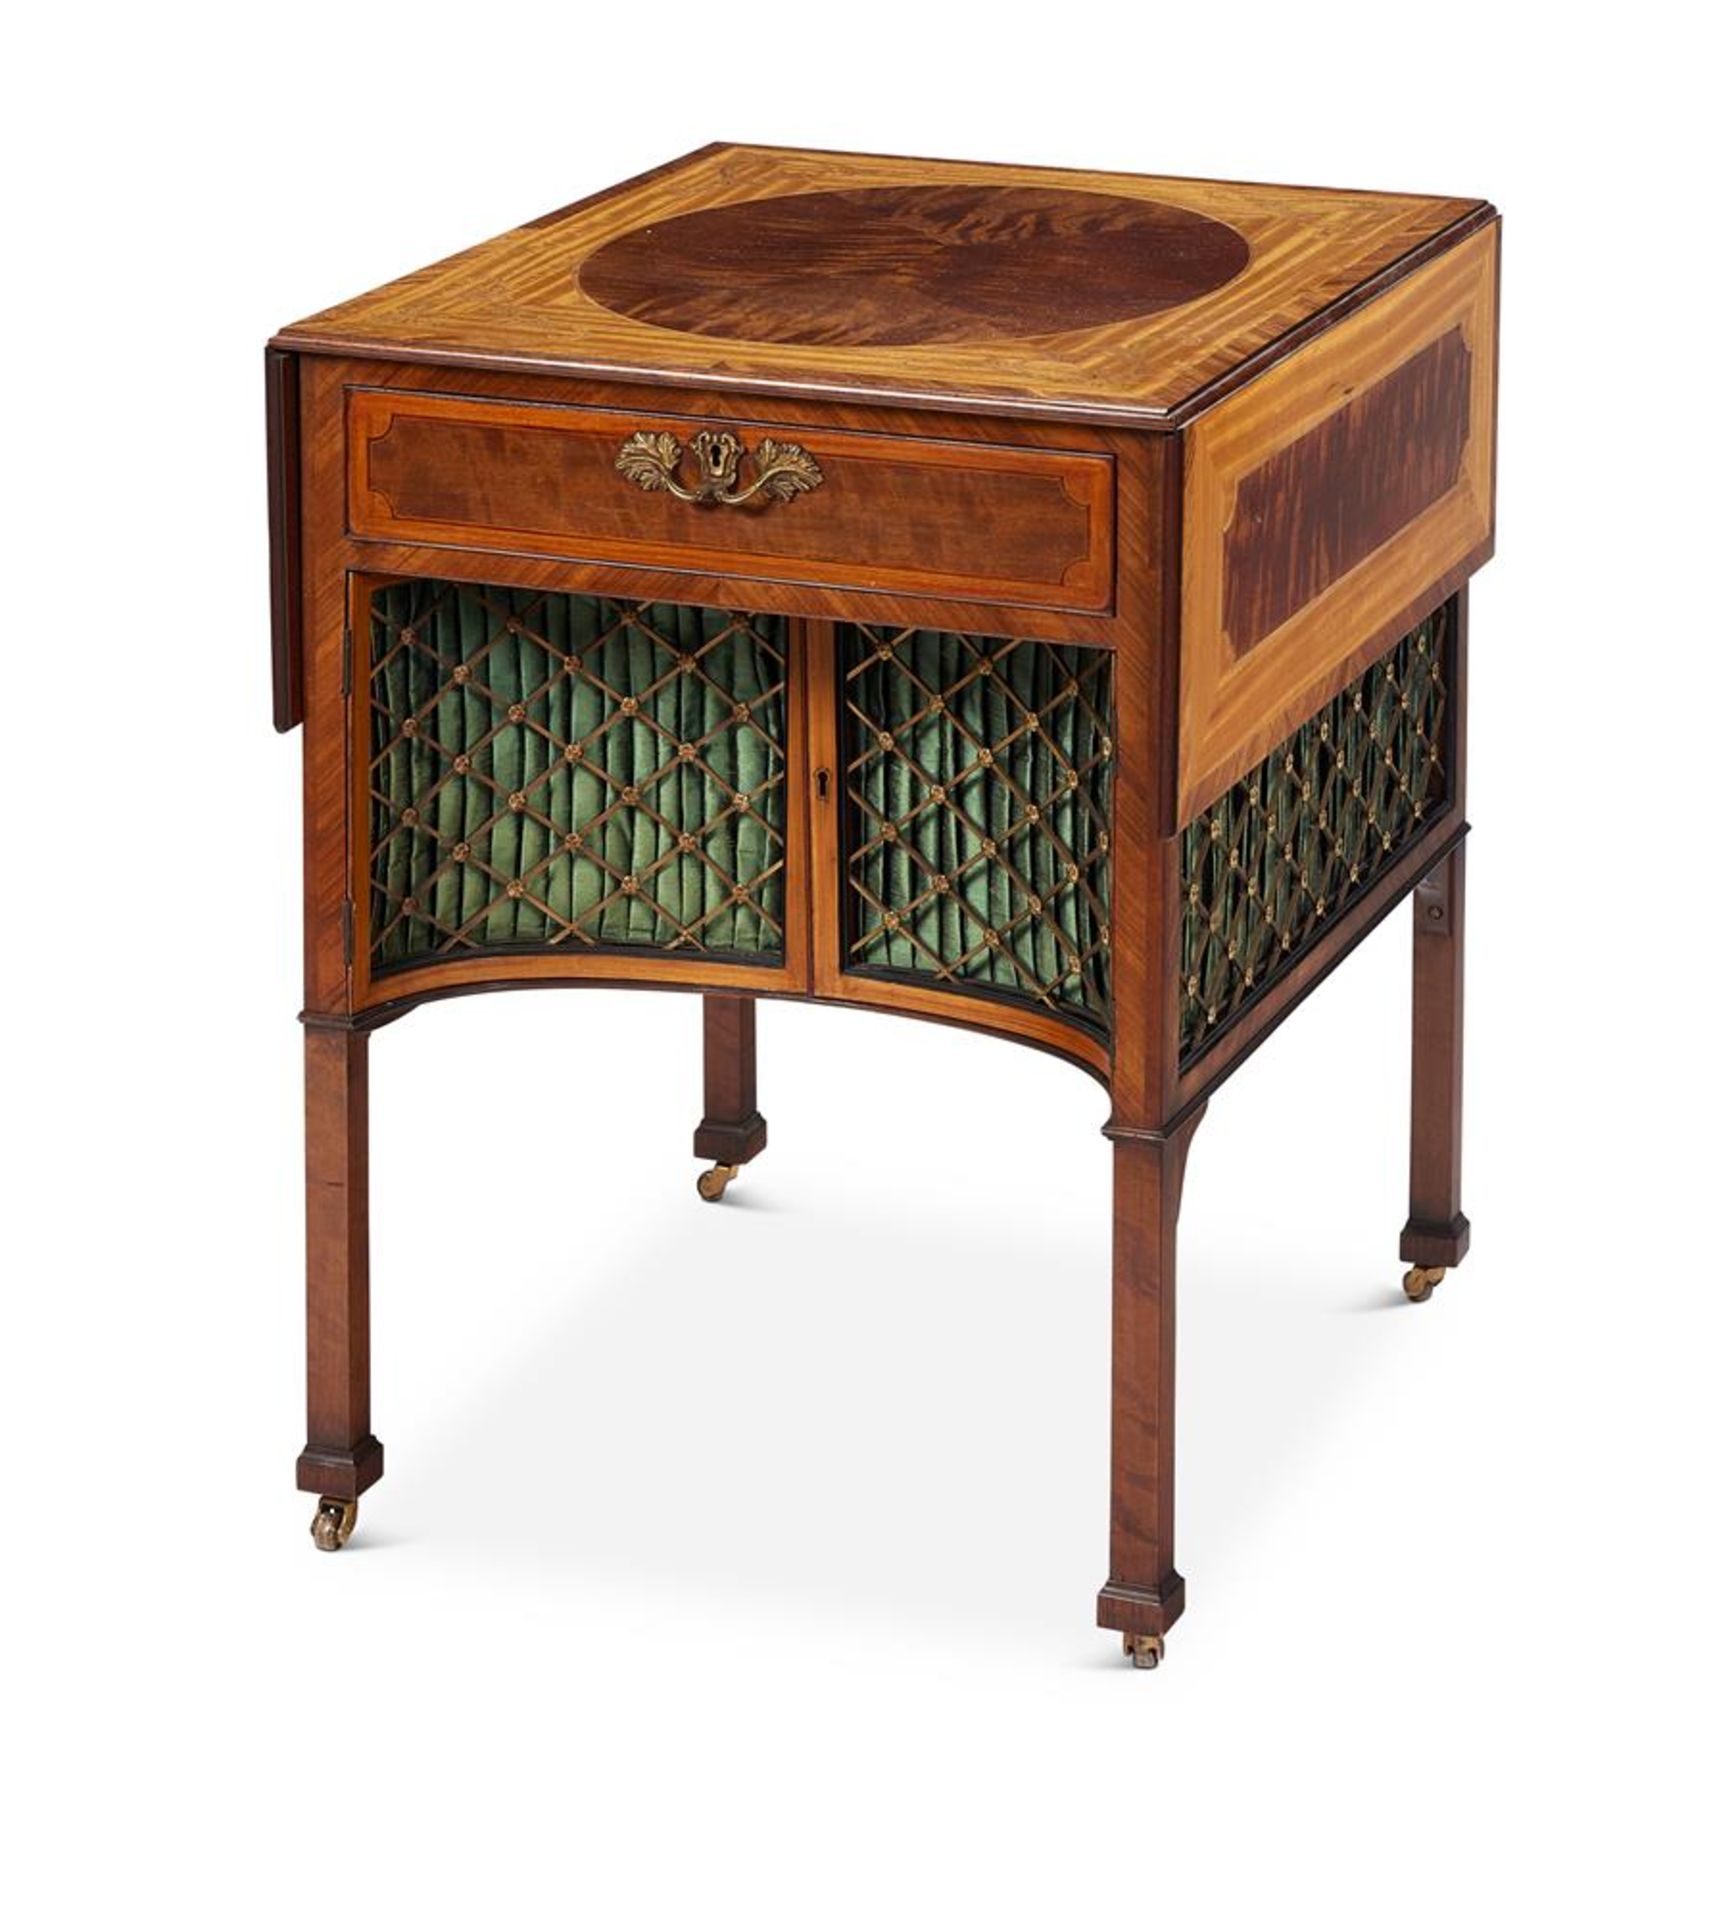 A SATINWOOD AND MARQUETRY INLAID 'BREAKFASTE' TABLE IN GEORGE III STYLE